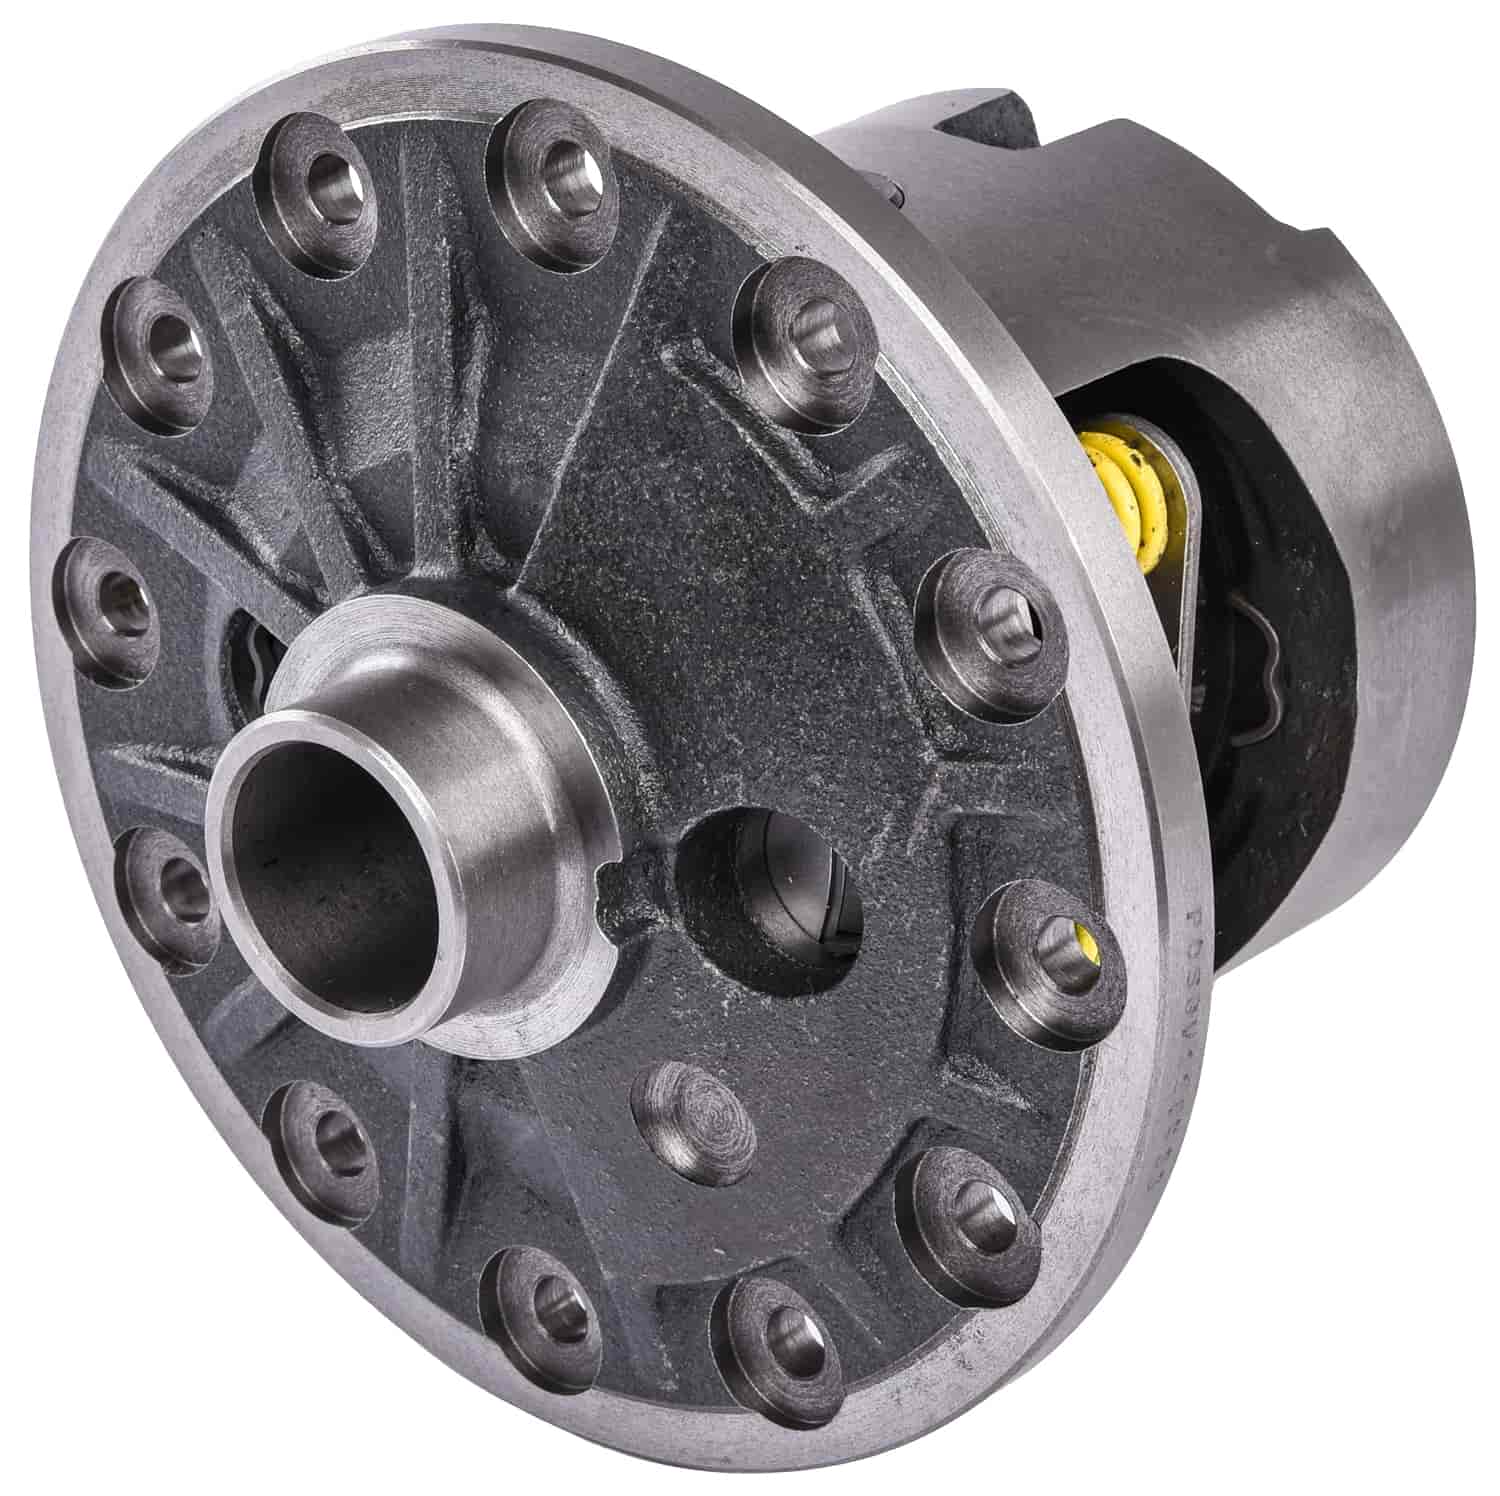 Posi Traction Differential for GM Car 12-Bolt 8.875 in. Rear, 33-Spline [4.10 up Ratio]